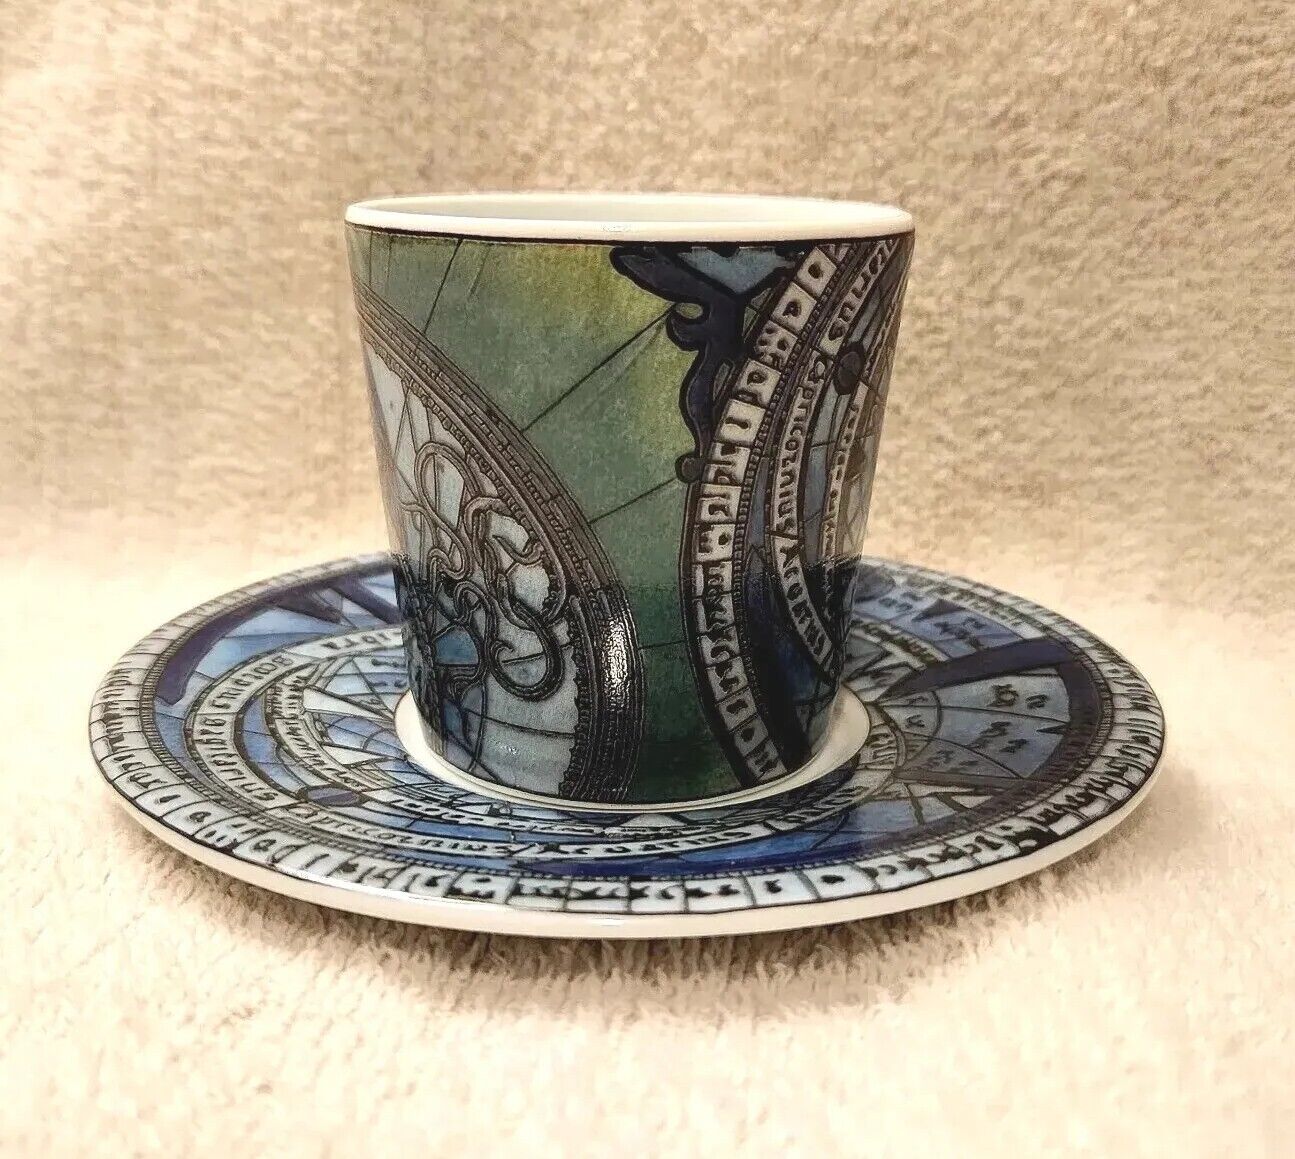 Beautiful Block SPAL Cup & Saucer Designed by Fernanda Neves EXCELLENT CONDITION